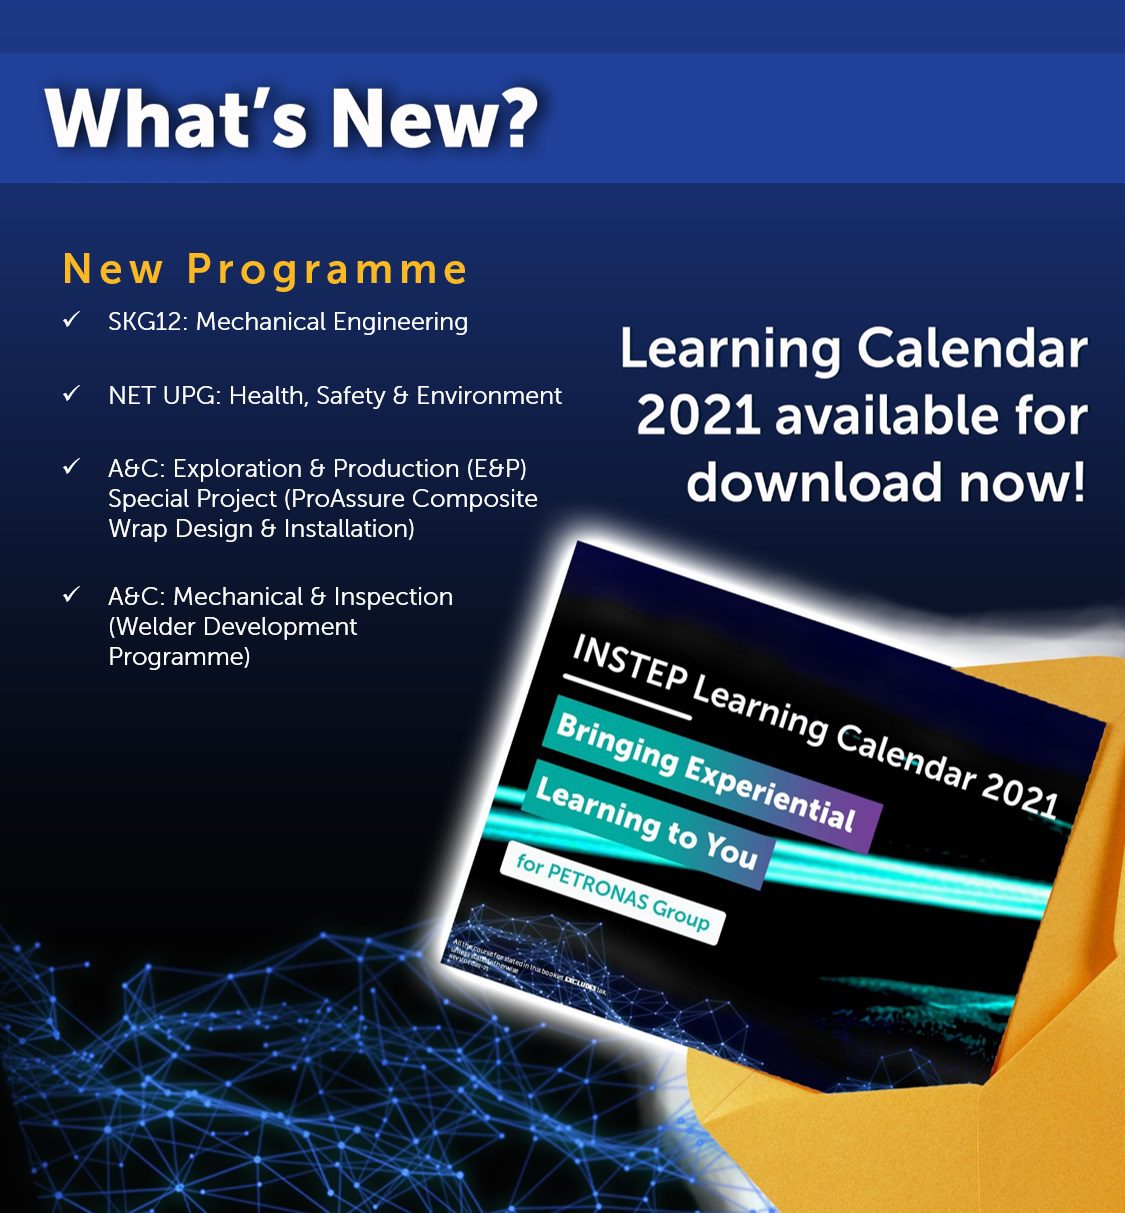 Latest INSTEP Learning Calendar 2021 is here!